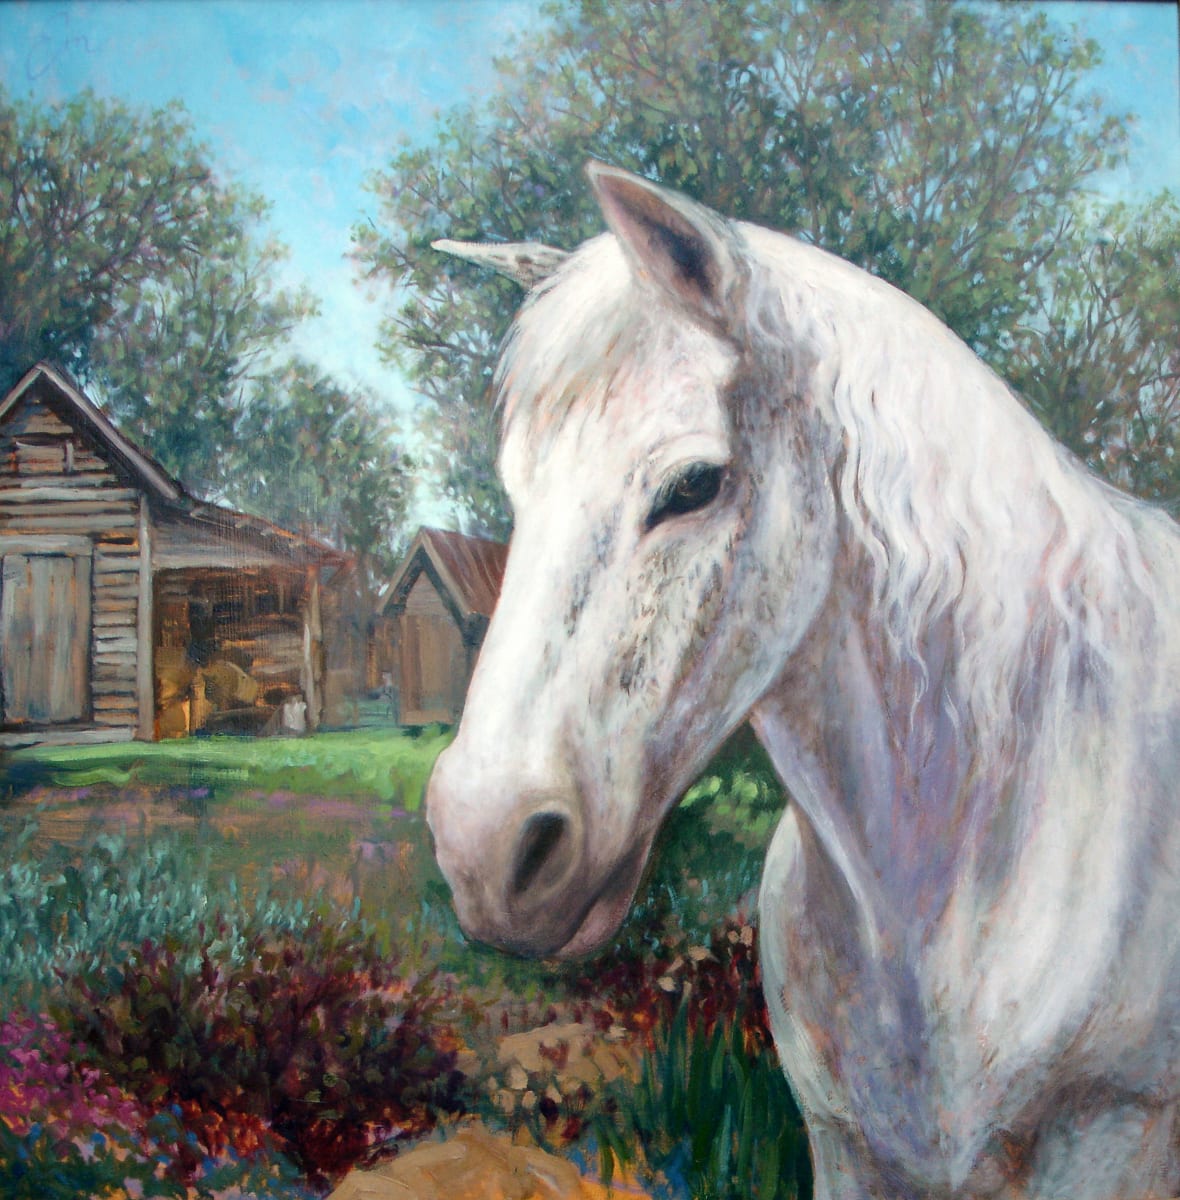 Mandy, Durham's Free Ranging Horse  Image: Mandy lived on land surrounded by forest, but met the school bus daily. The owners would only sell their extensive acerage as long as Mandy's grave was safe from future developement. This land became Hollow Rock Nature Park. Mandy lived to 30+ years. This painting I did of the beloved Mandy for my book "Saving Magic Places".